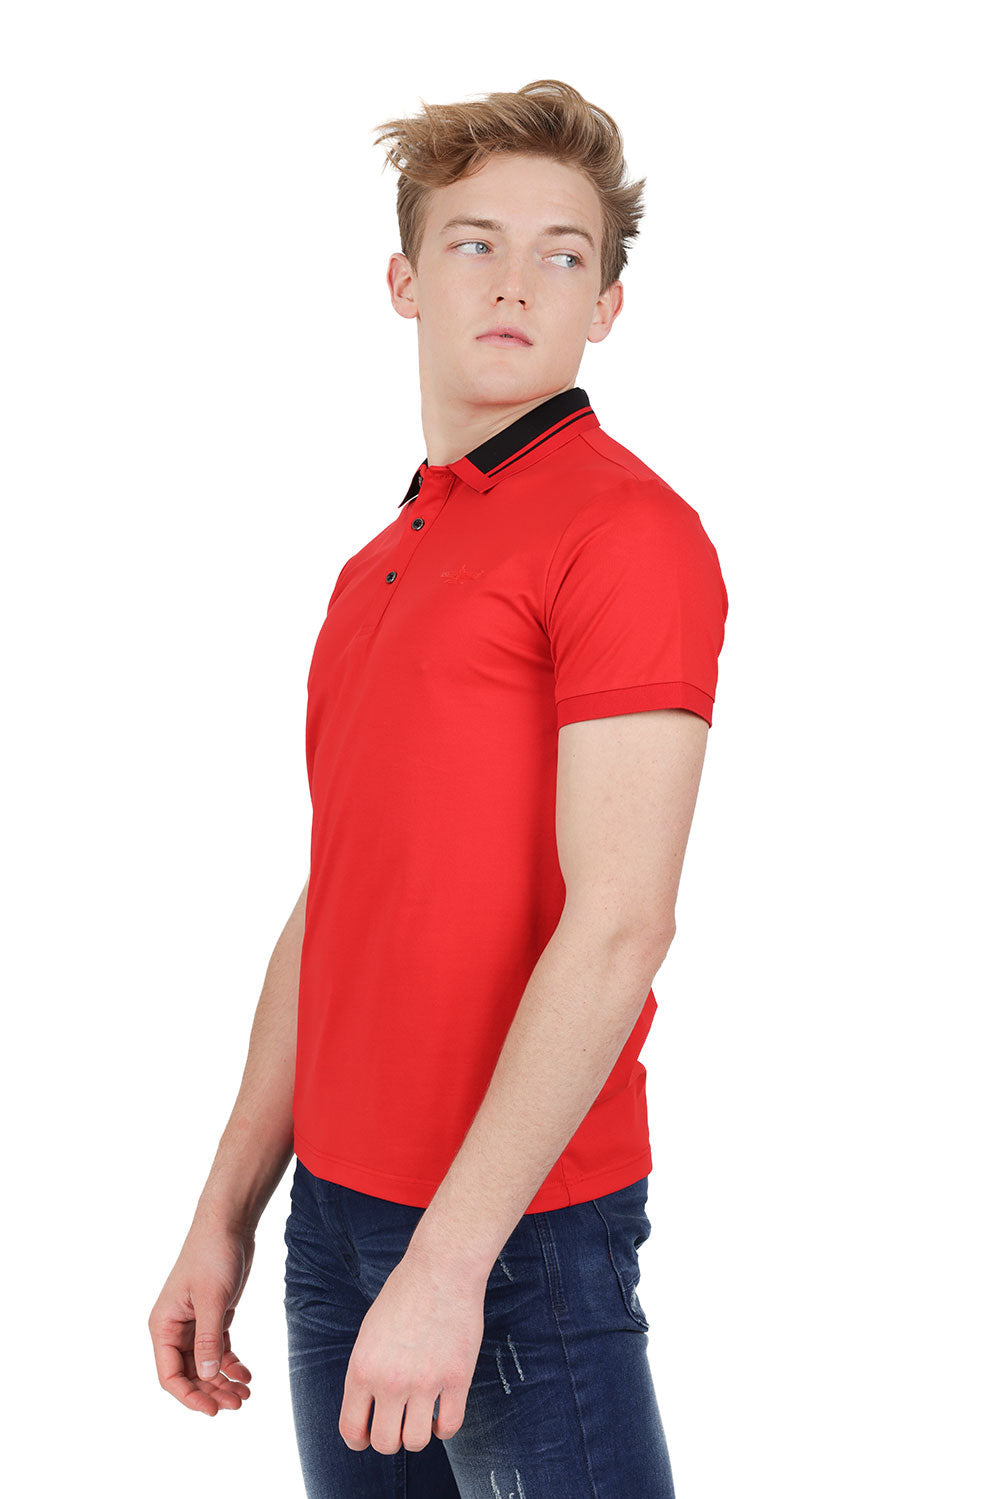 Barabas Men's Solid Color Luxury Short Sleeves Polo Shirts PP824 Red